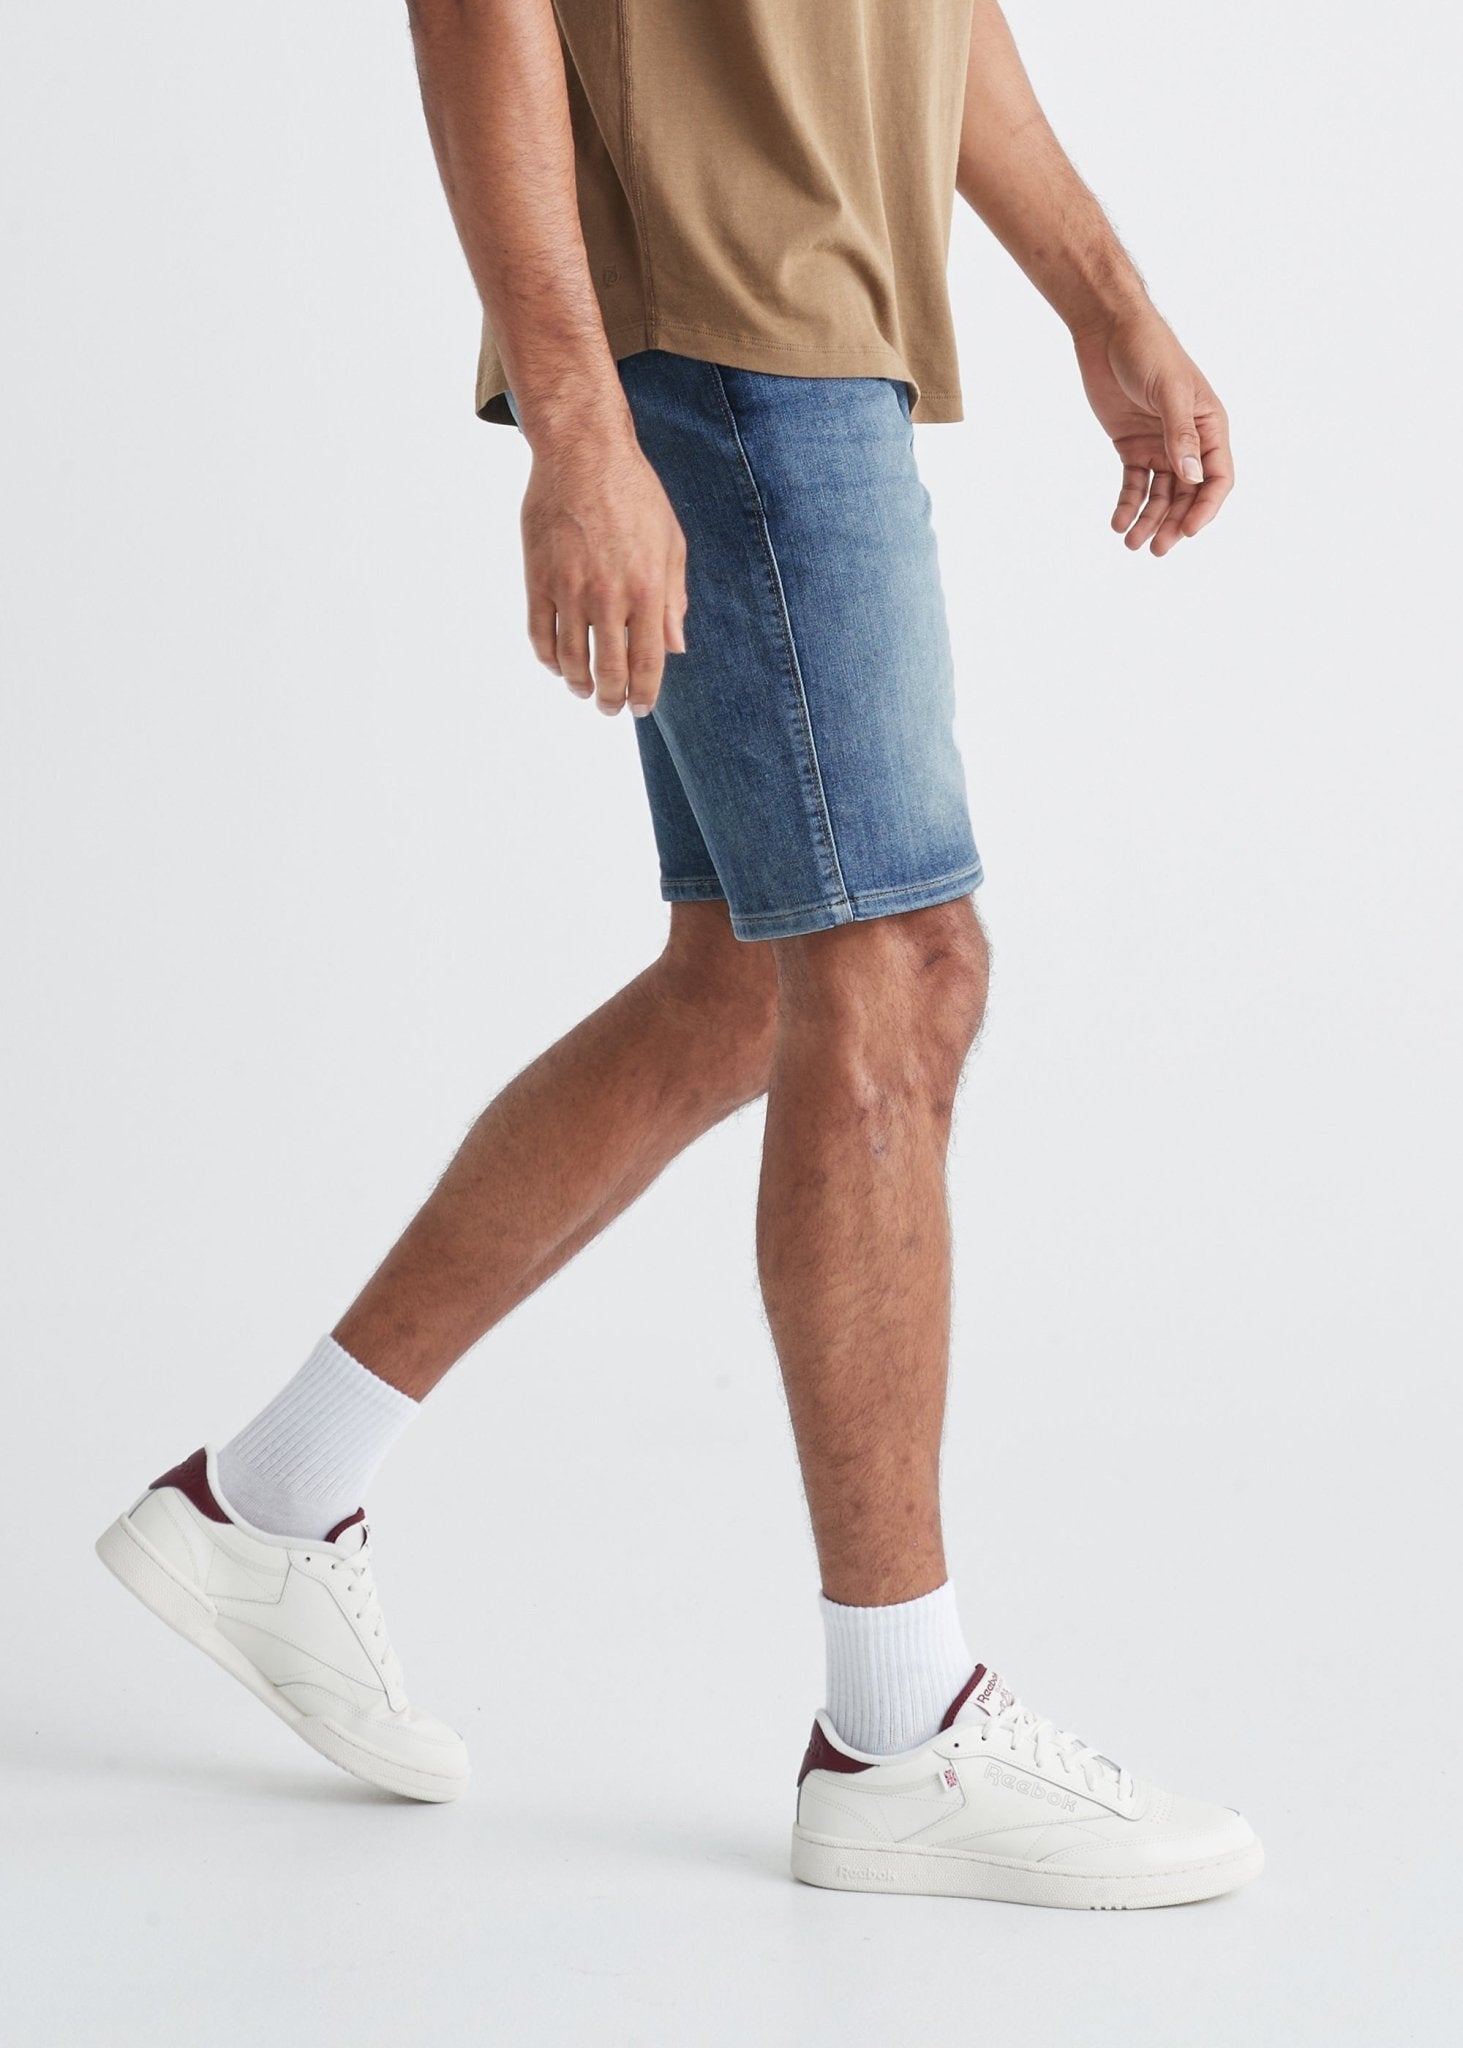 Everyday Stretch Shorts with a Comfortable Built-In Liner - Denim Style-  Grey